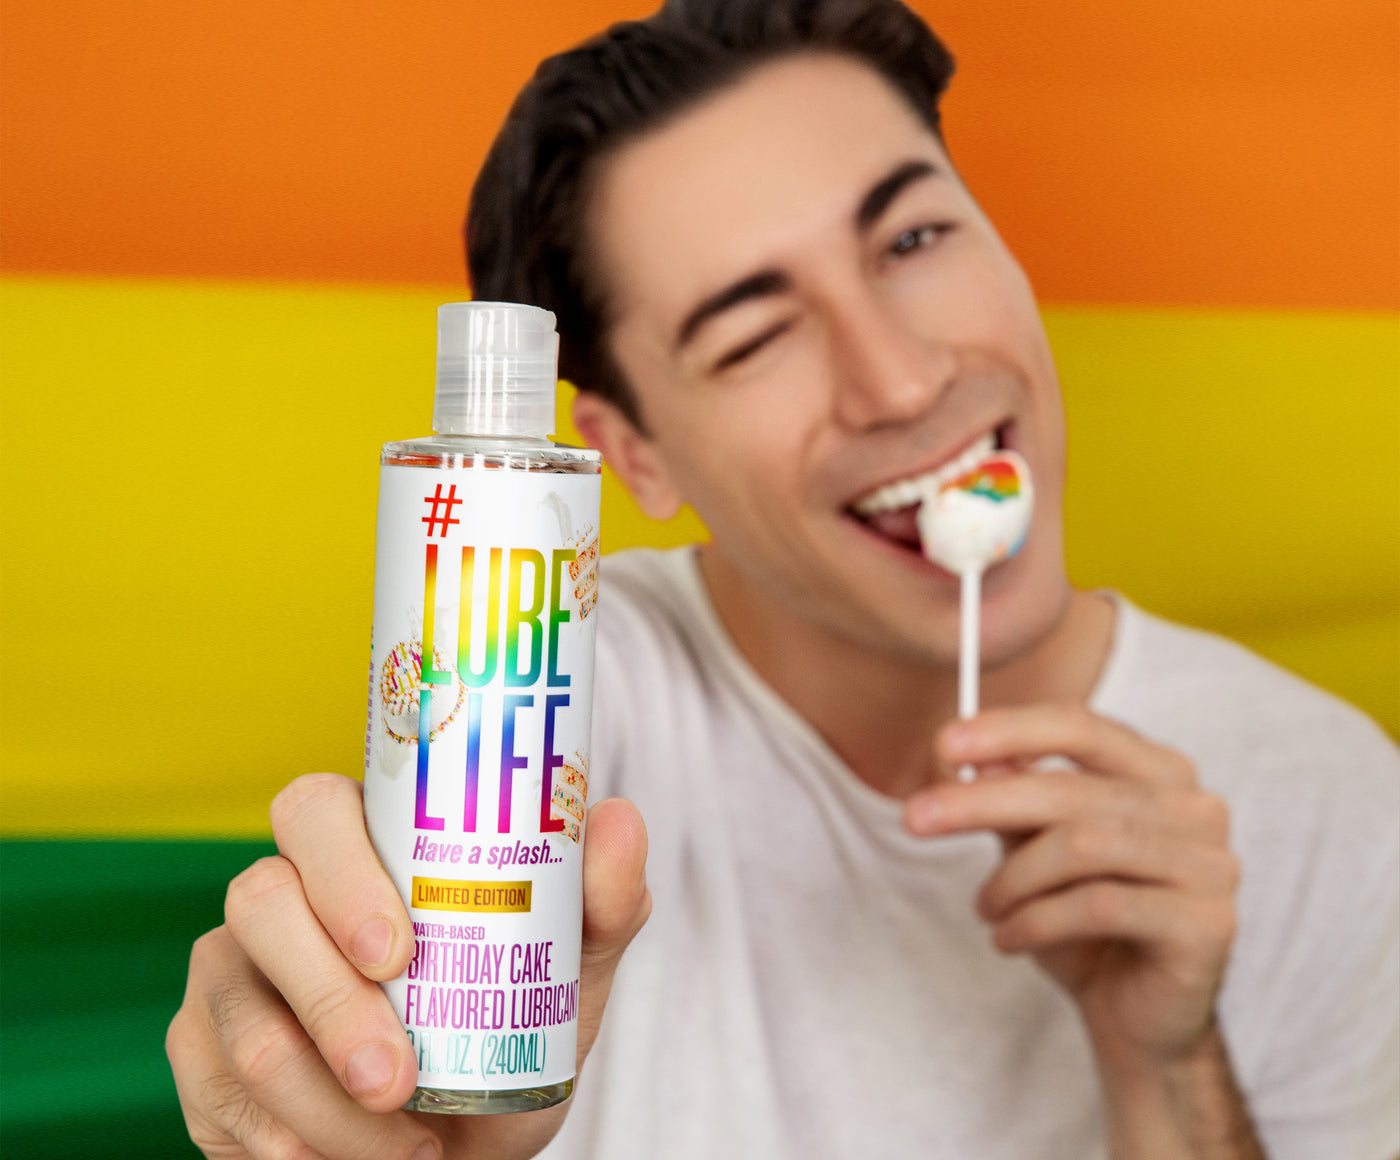 Man eating candy and holding lubelife in background pride Flag